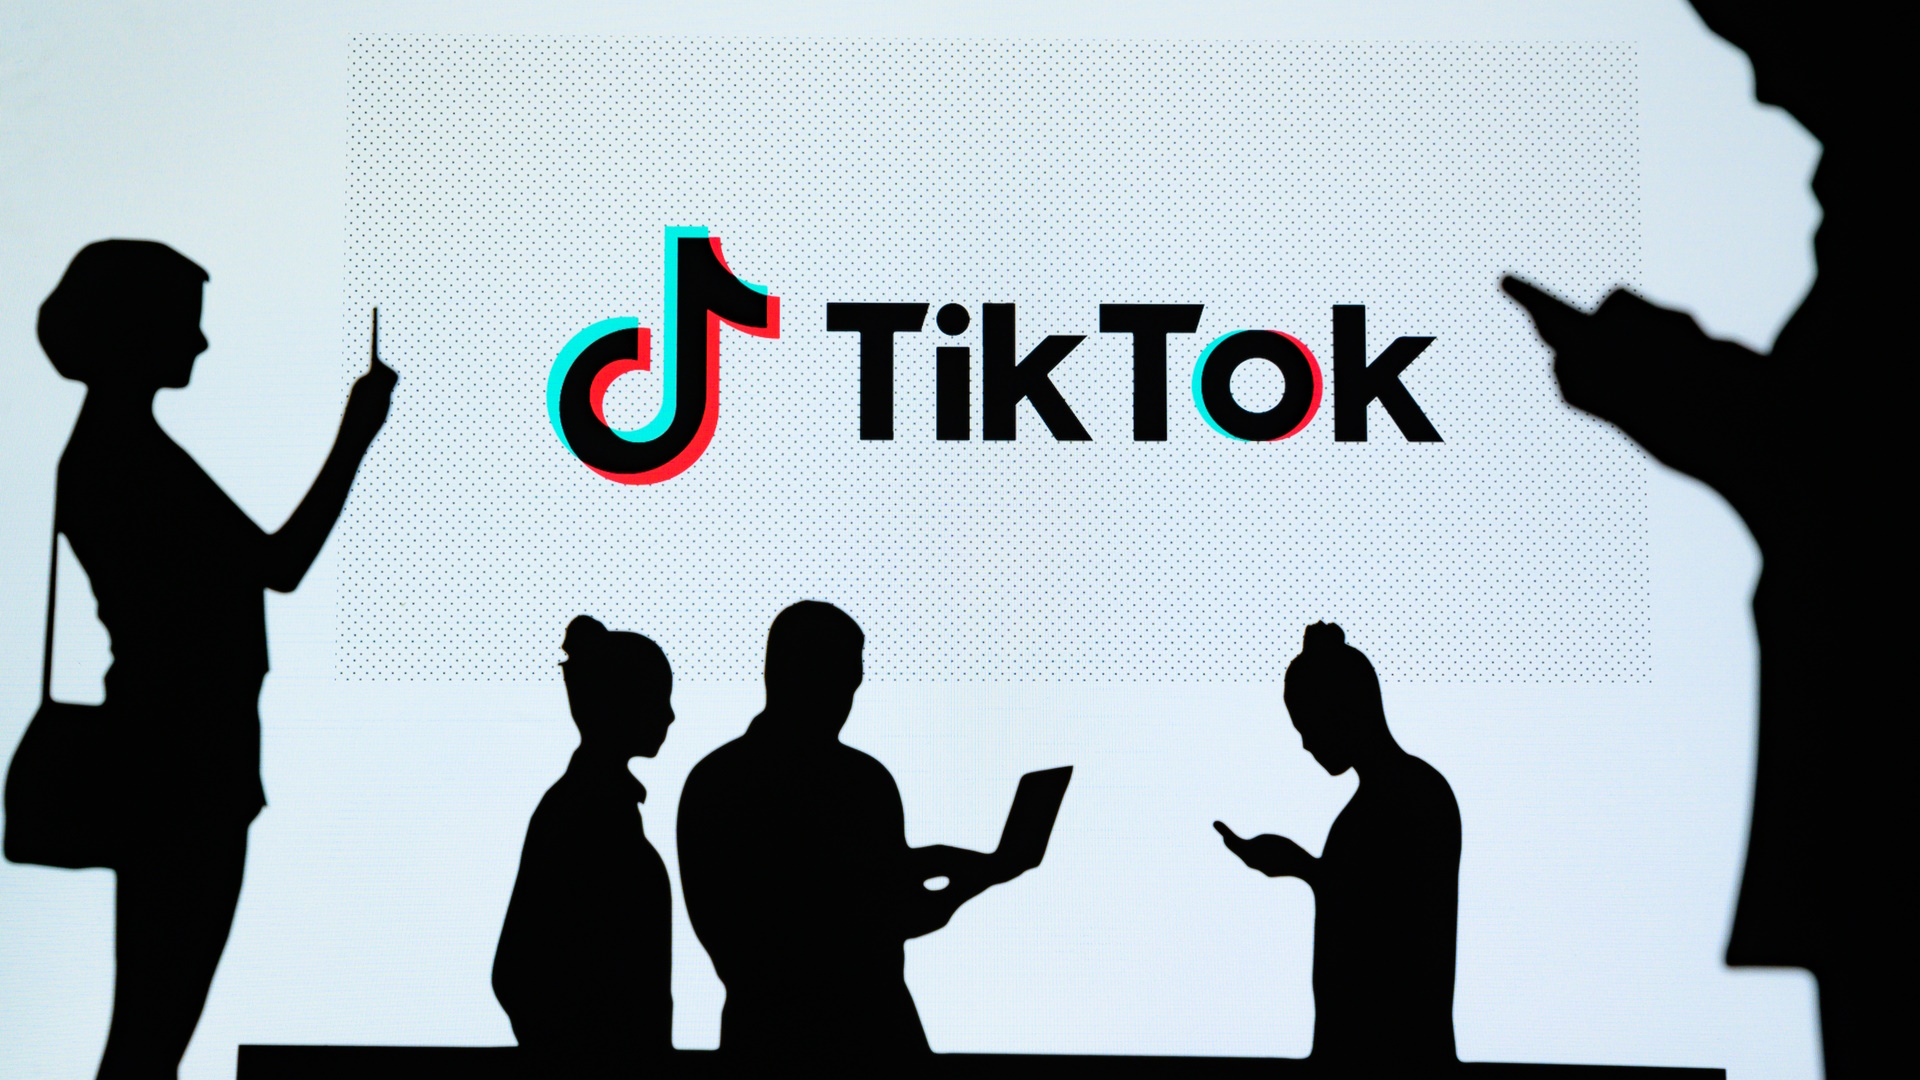 TikTok is the first app to surpass $10 billion in spending through in-app purchases